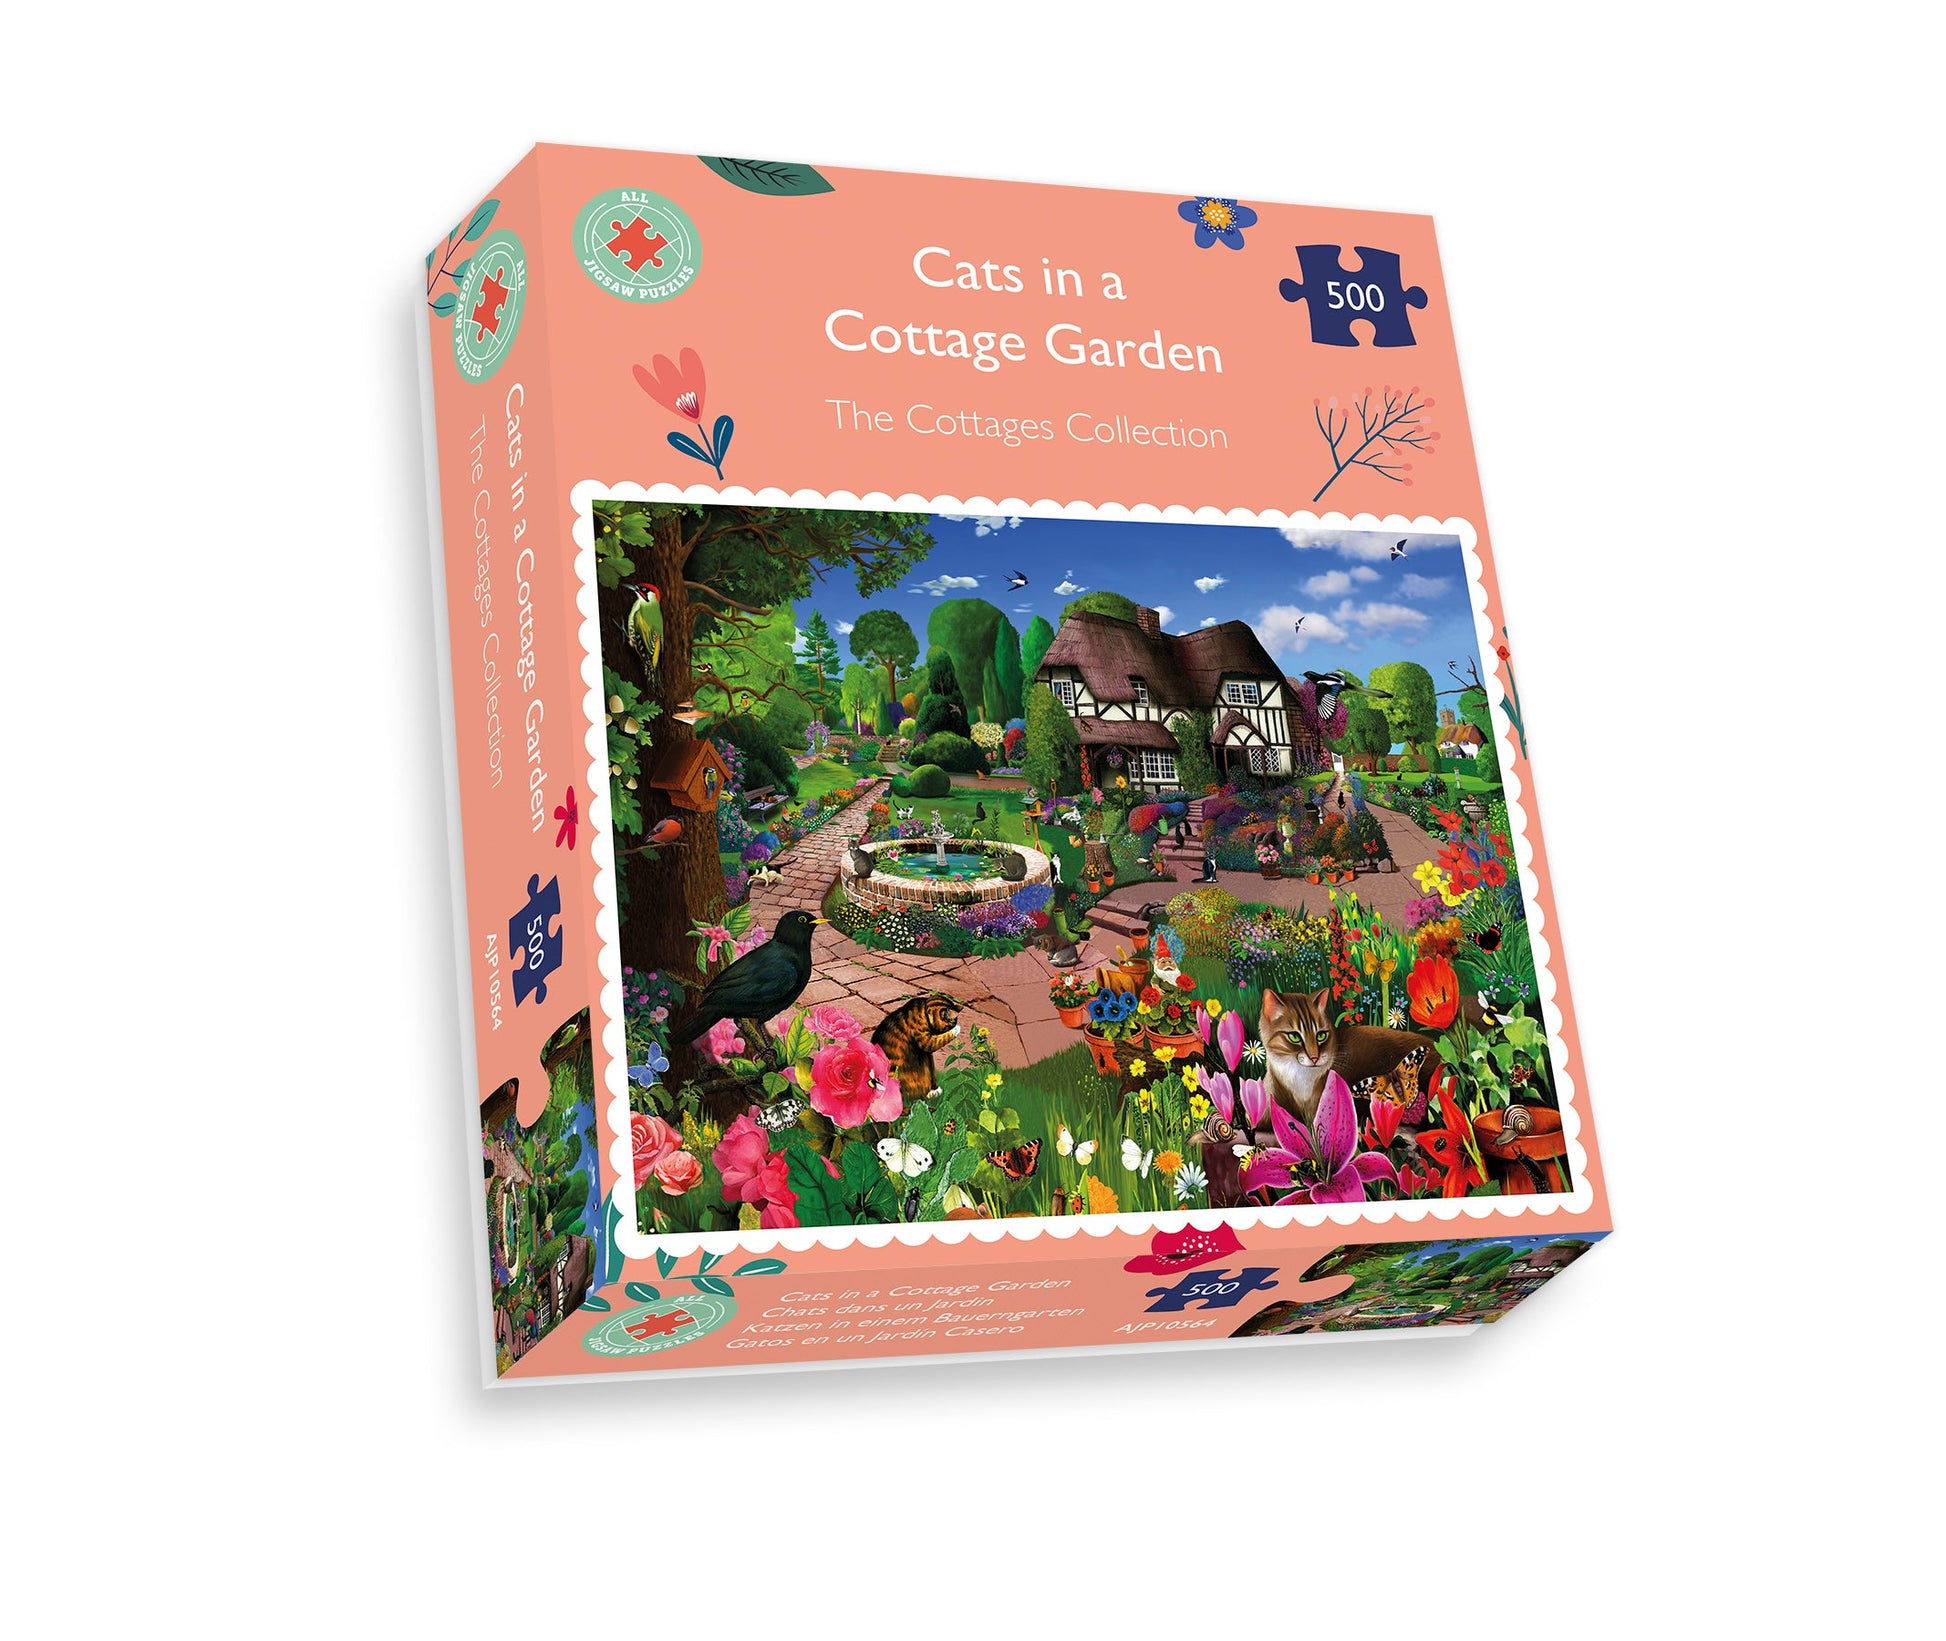 Cats in a Cottage Garden 500 Piece Jigsaw Puzzles